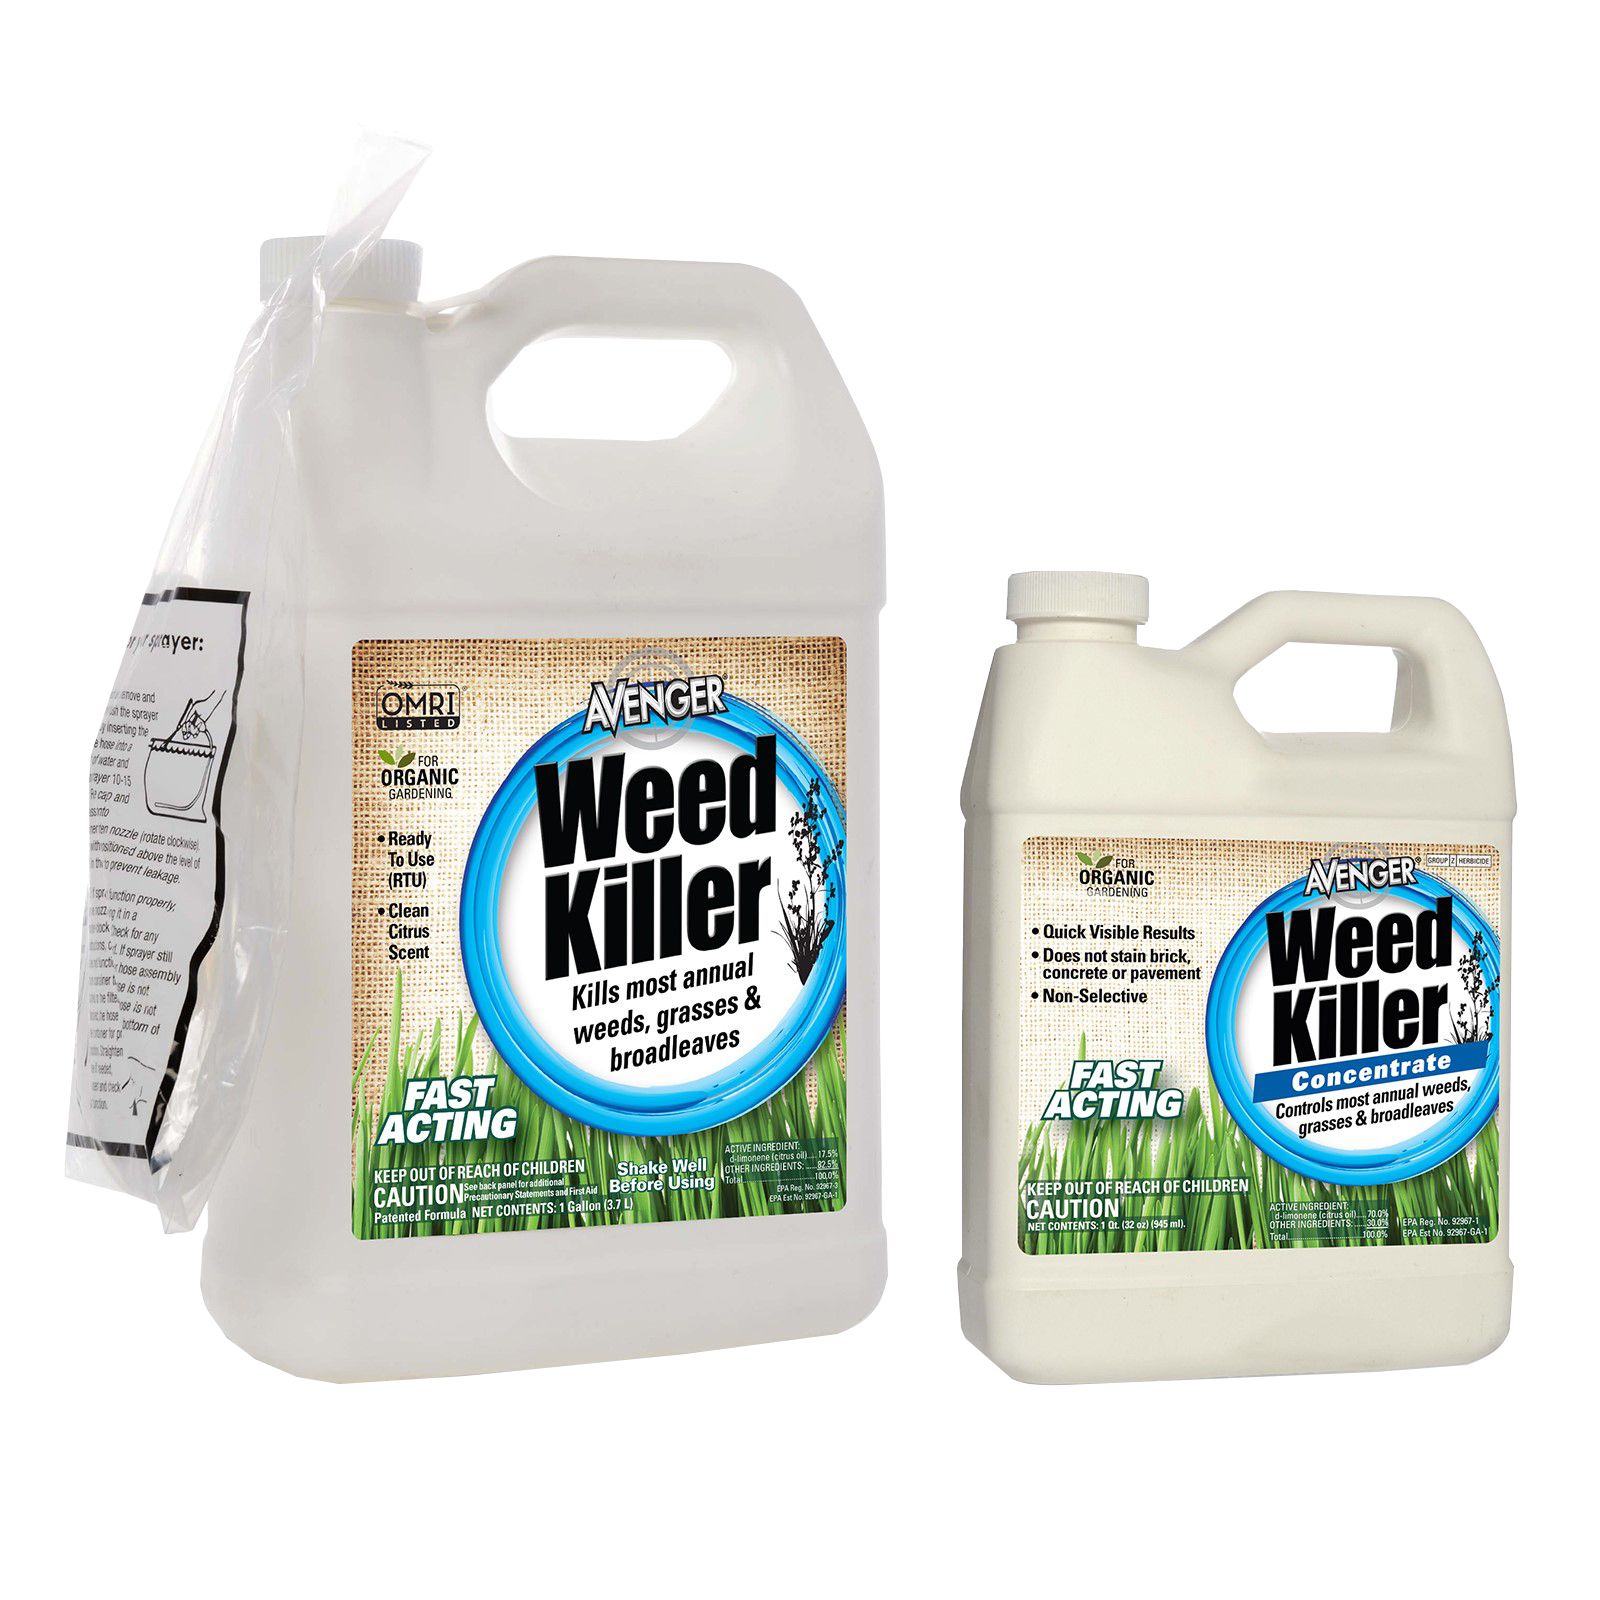 Avenger Natural Weed Killer, 1 Gallon, and Weed Killer Concentrate, 32 oz., Combo Pack